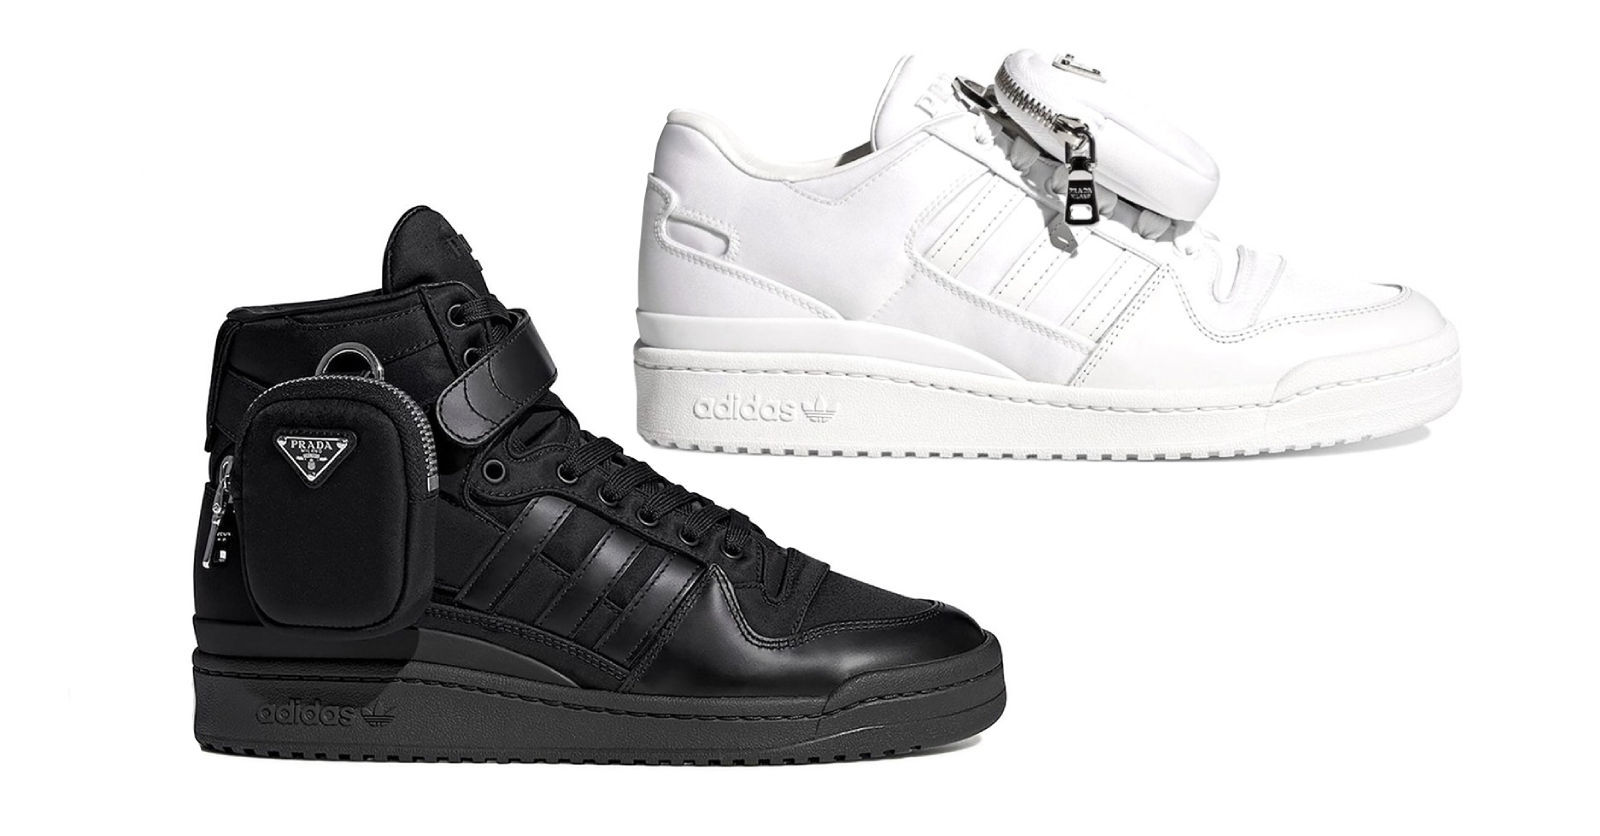 Prada x Adidas is back with a fresh take on the Forum sneakers